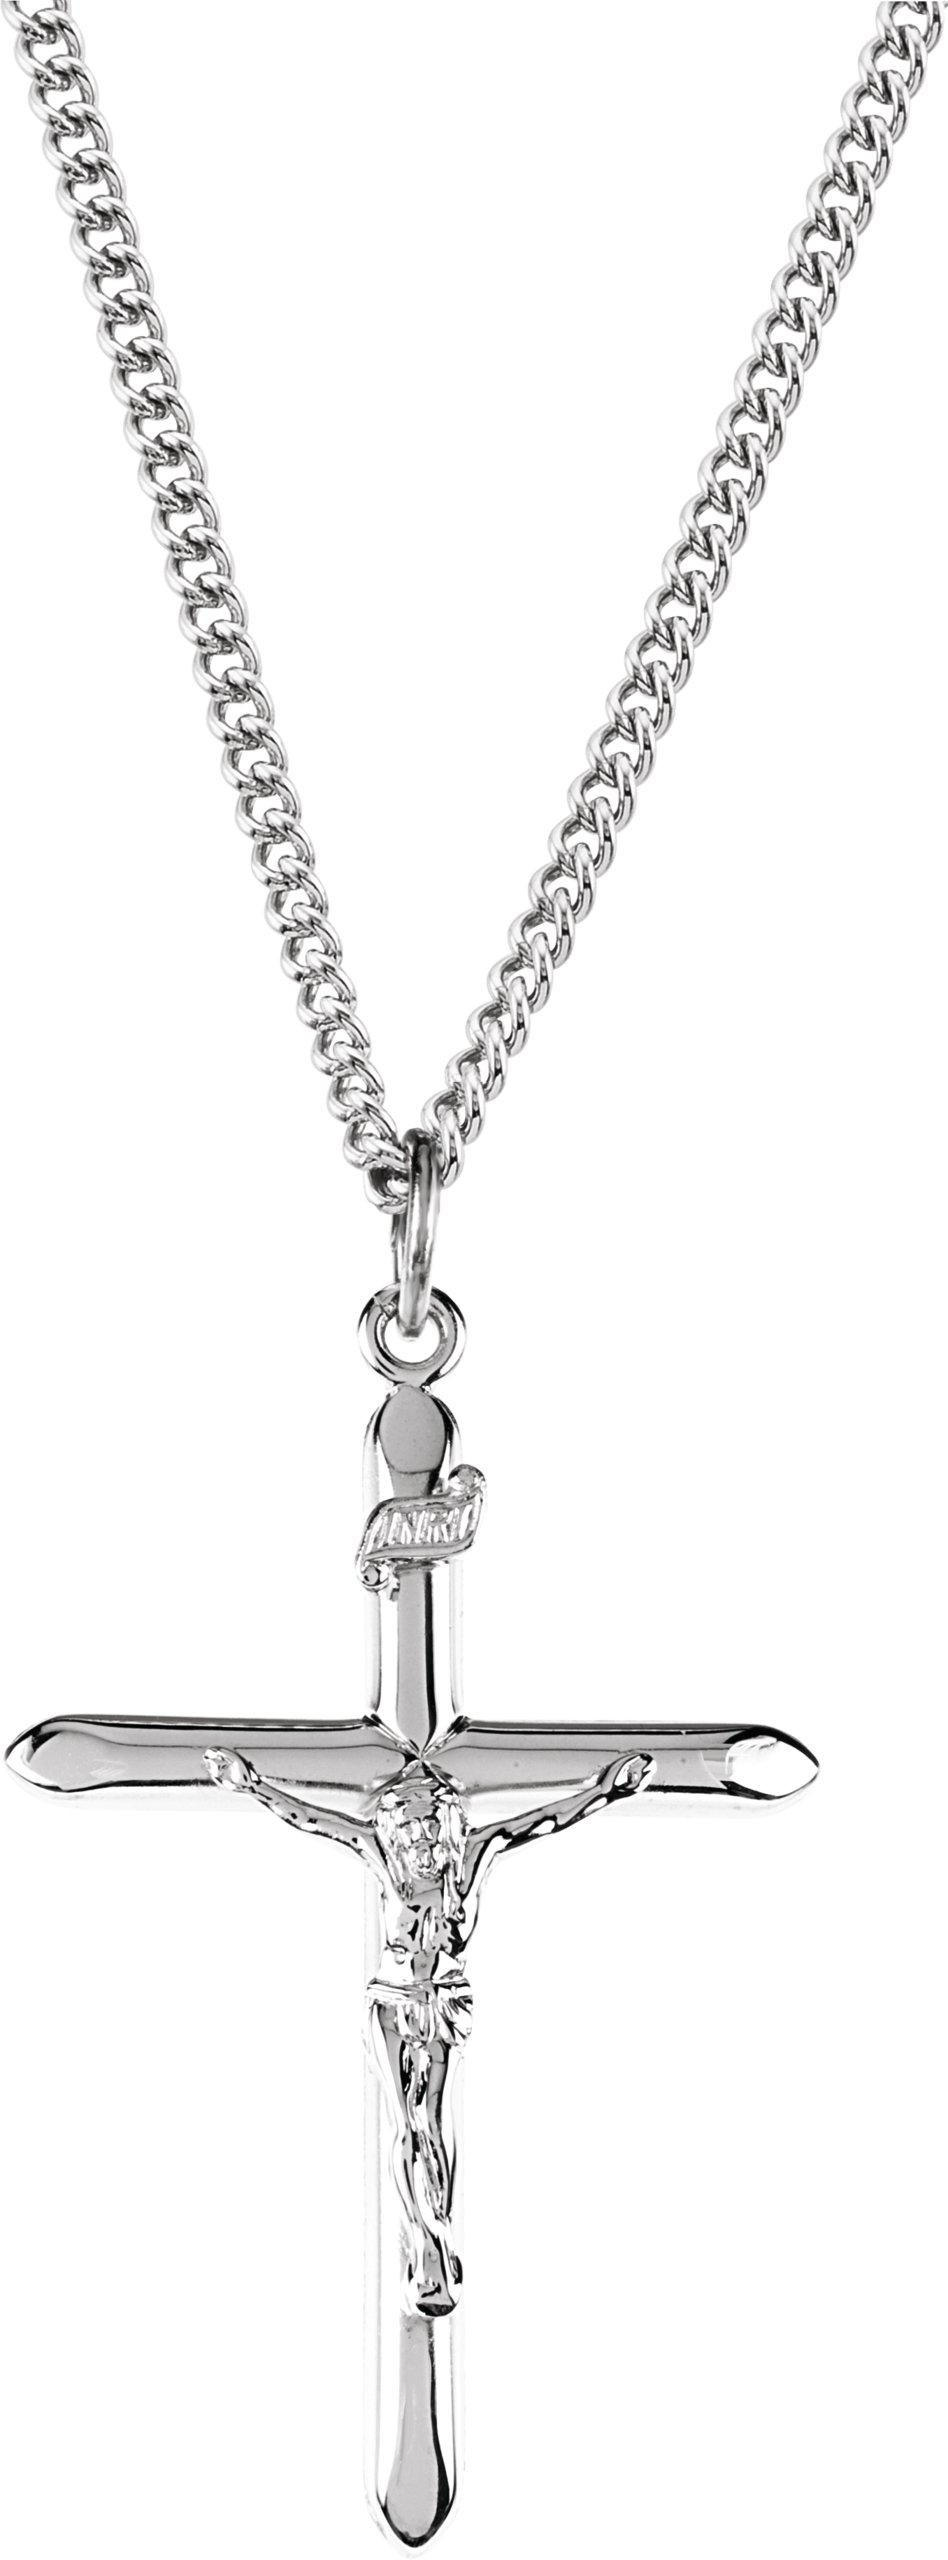 Sterling Silver Crucifix 24 inch Necklace 34 x 24mm Ref 749610